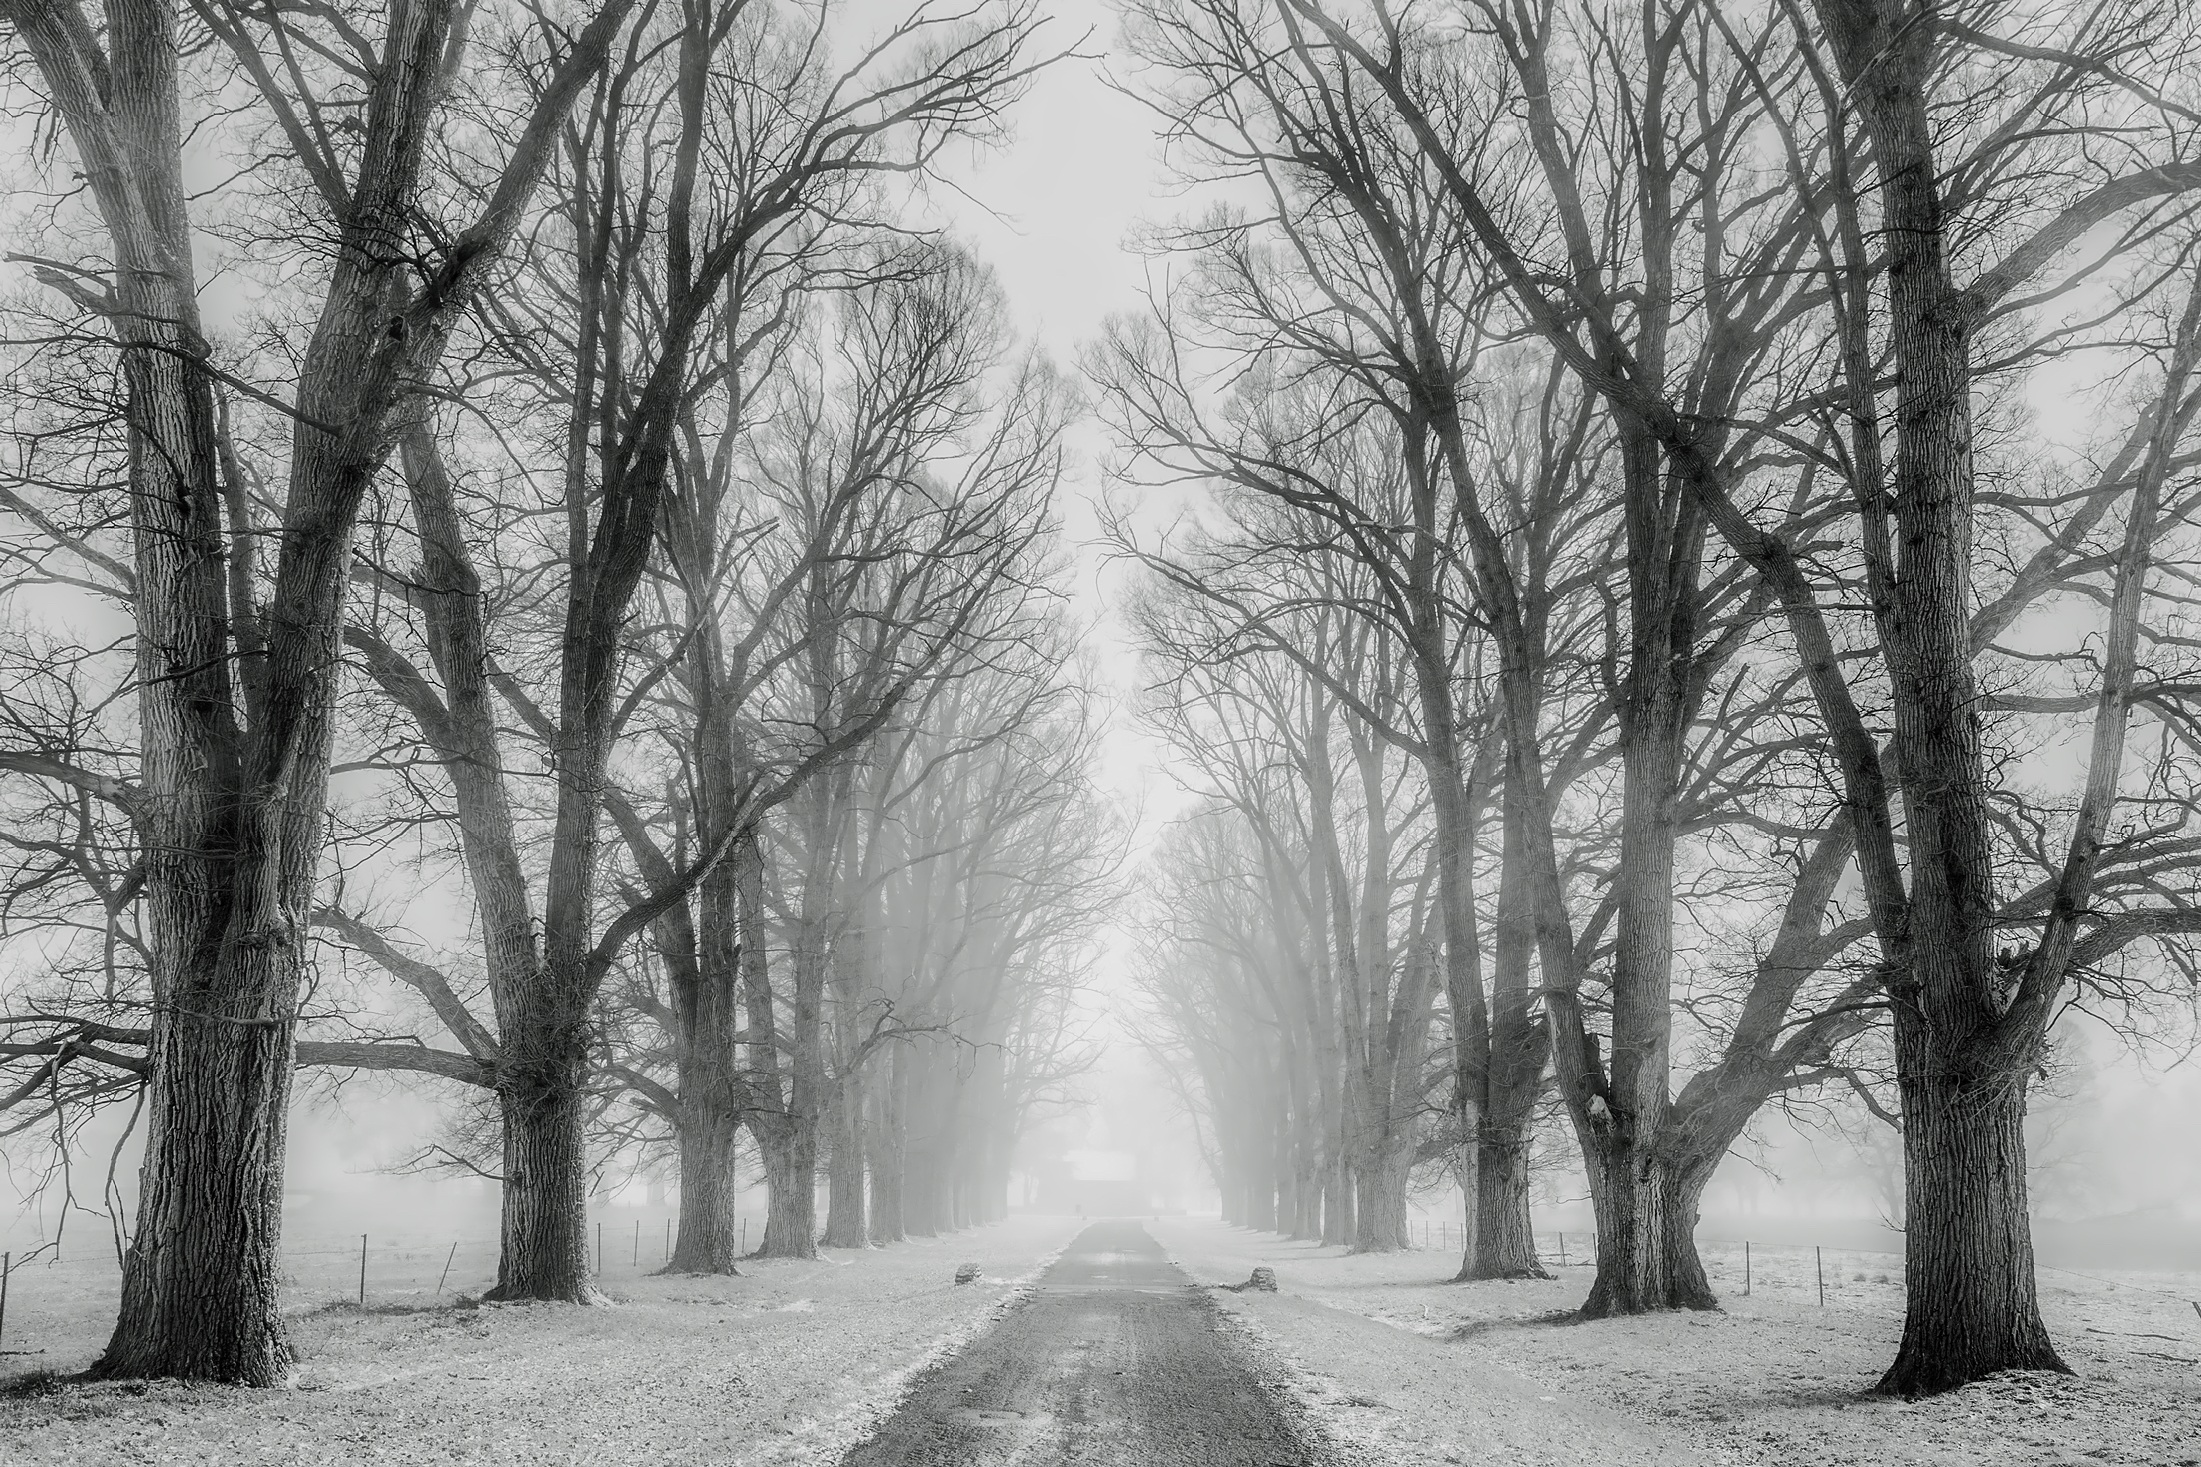 earth, winter, black & white, road, snow, tree lined